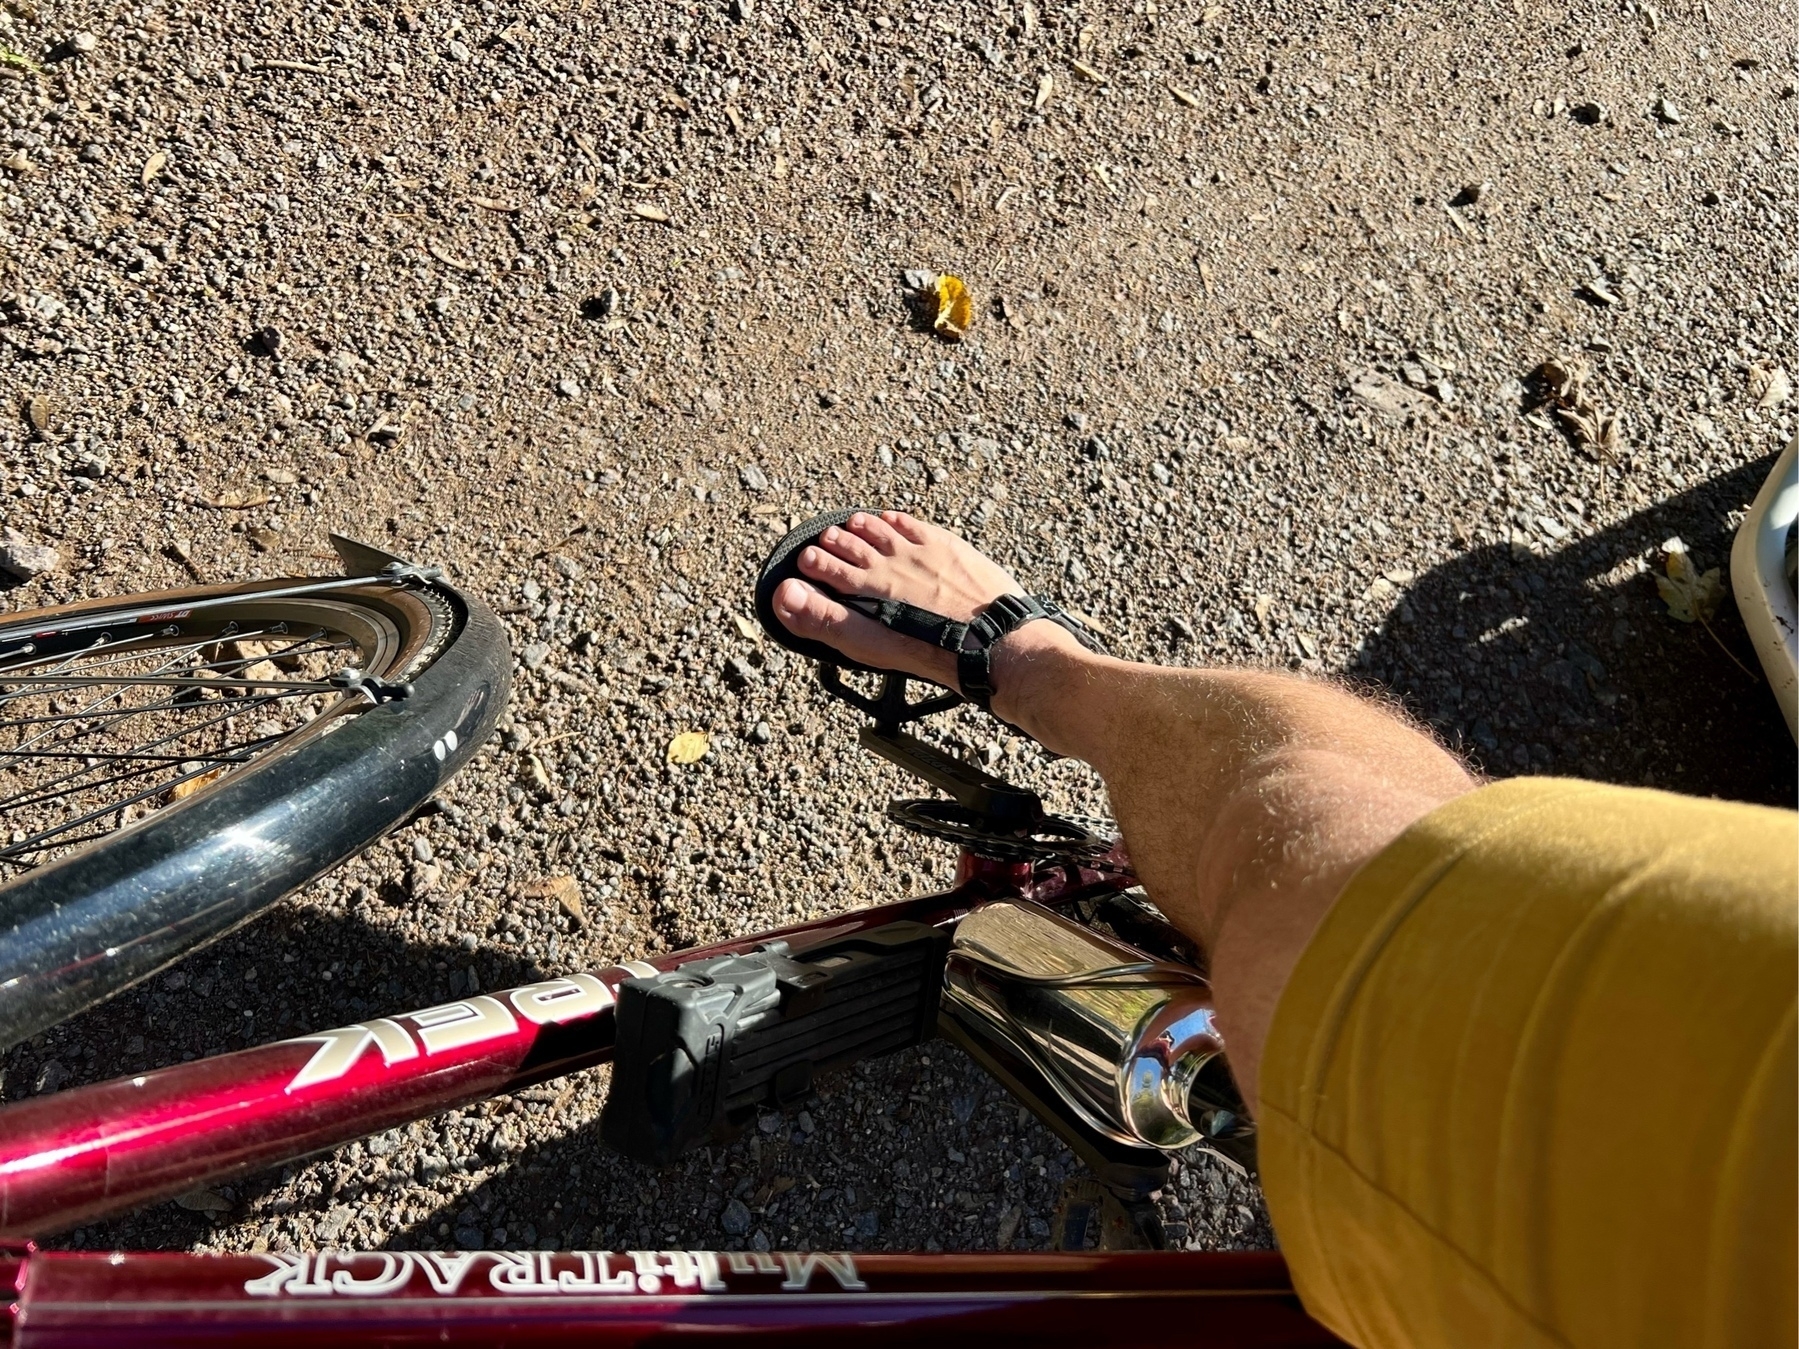 Downward look at an outstrechted leg standing on a pedal over a red bike frame. The person is wearing yellow shorts and black sandals.